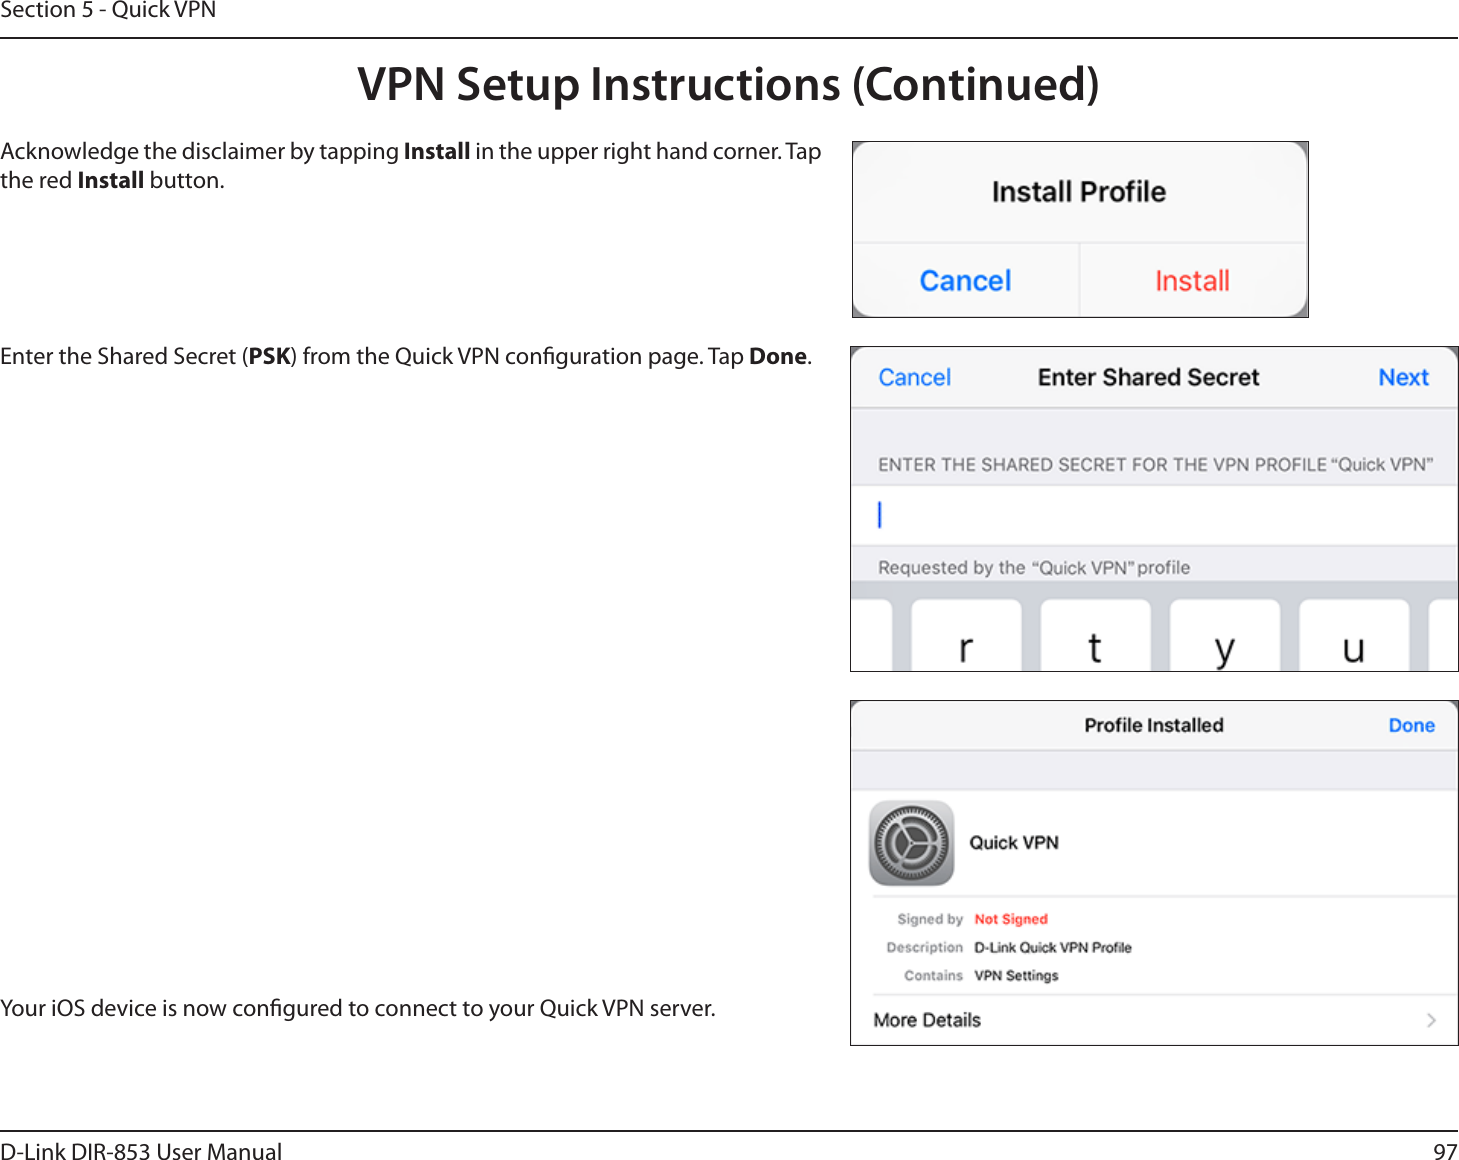 97D-Link DIR-853 User ManualSection 5 - Quick VPNYour iOS device is now congured to connect to your Quick VPN server.Enter the Shared Secret (PSK) from the Quick VPN conguration page. Tap Done.Acknowledge the disclaimer by tapping Install in the upper right hand corner. Tap the red Install button.VPN Setup Instructions (Continued)